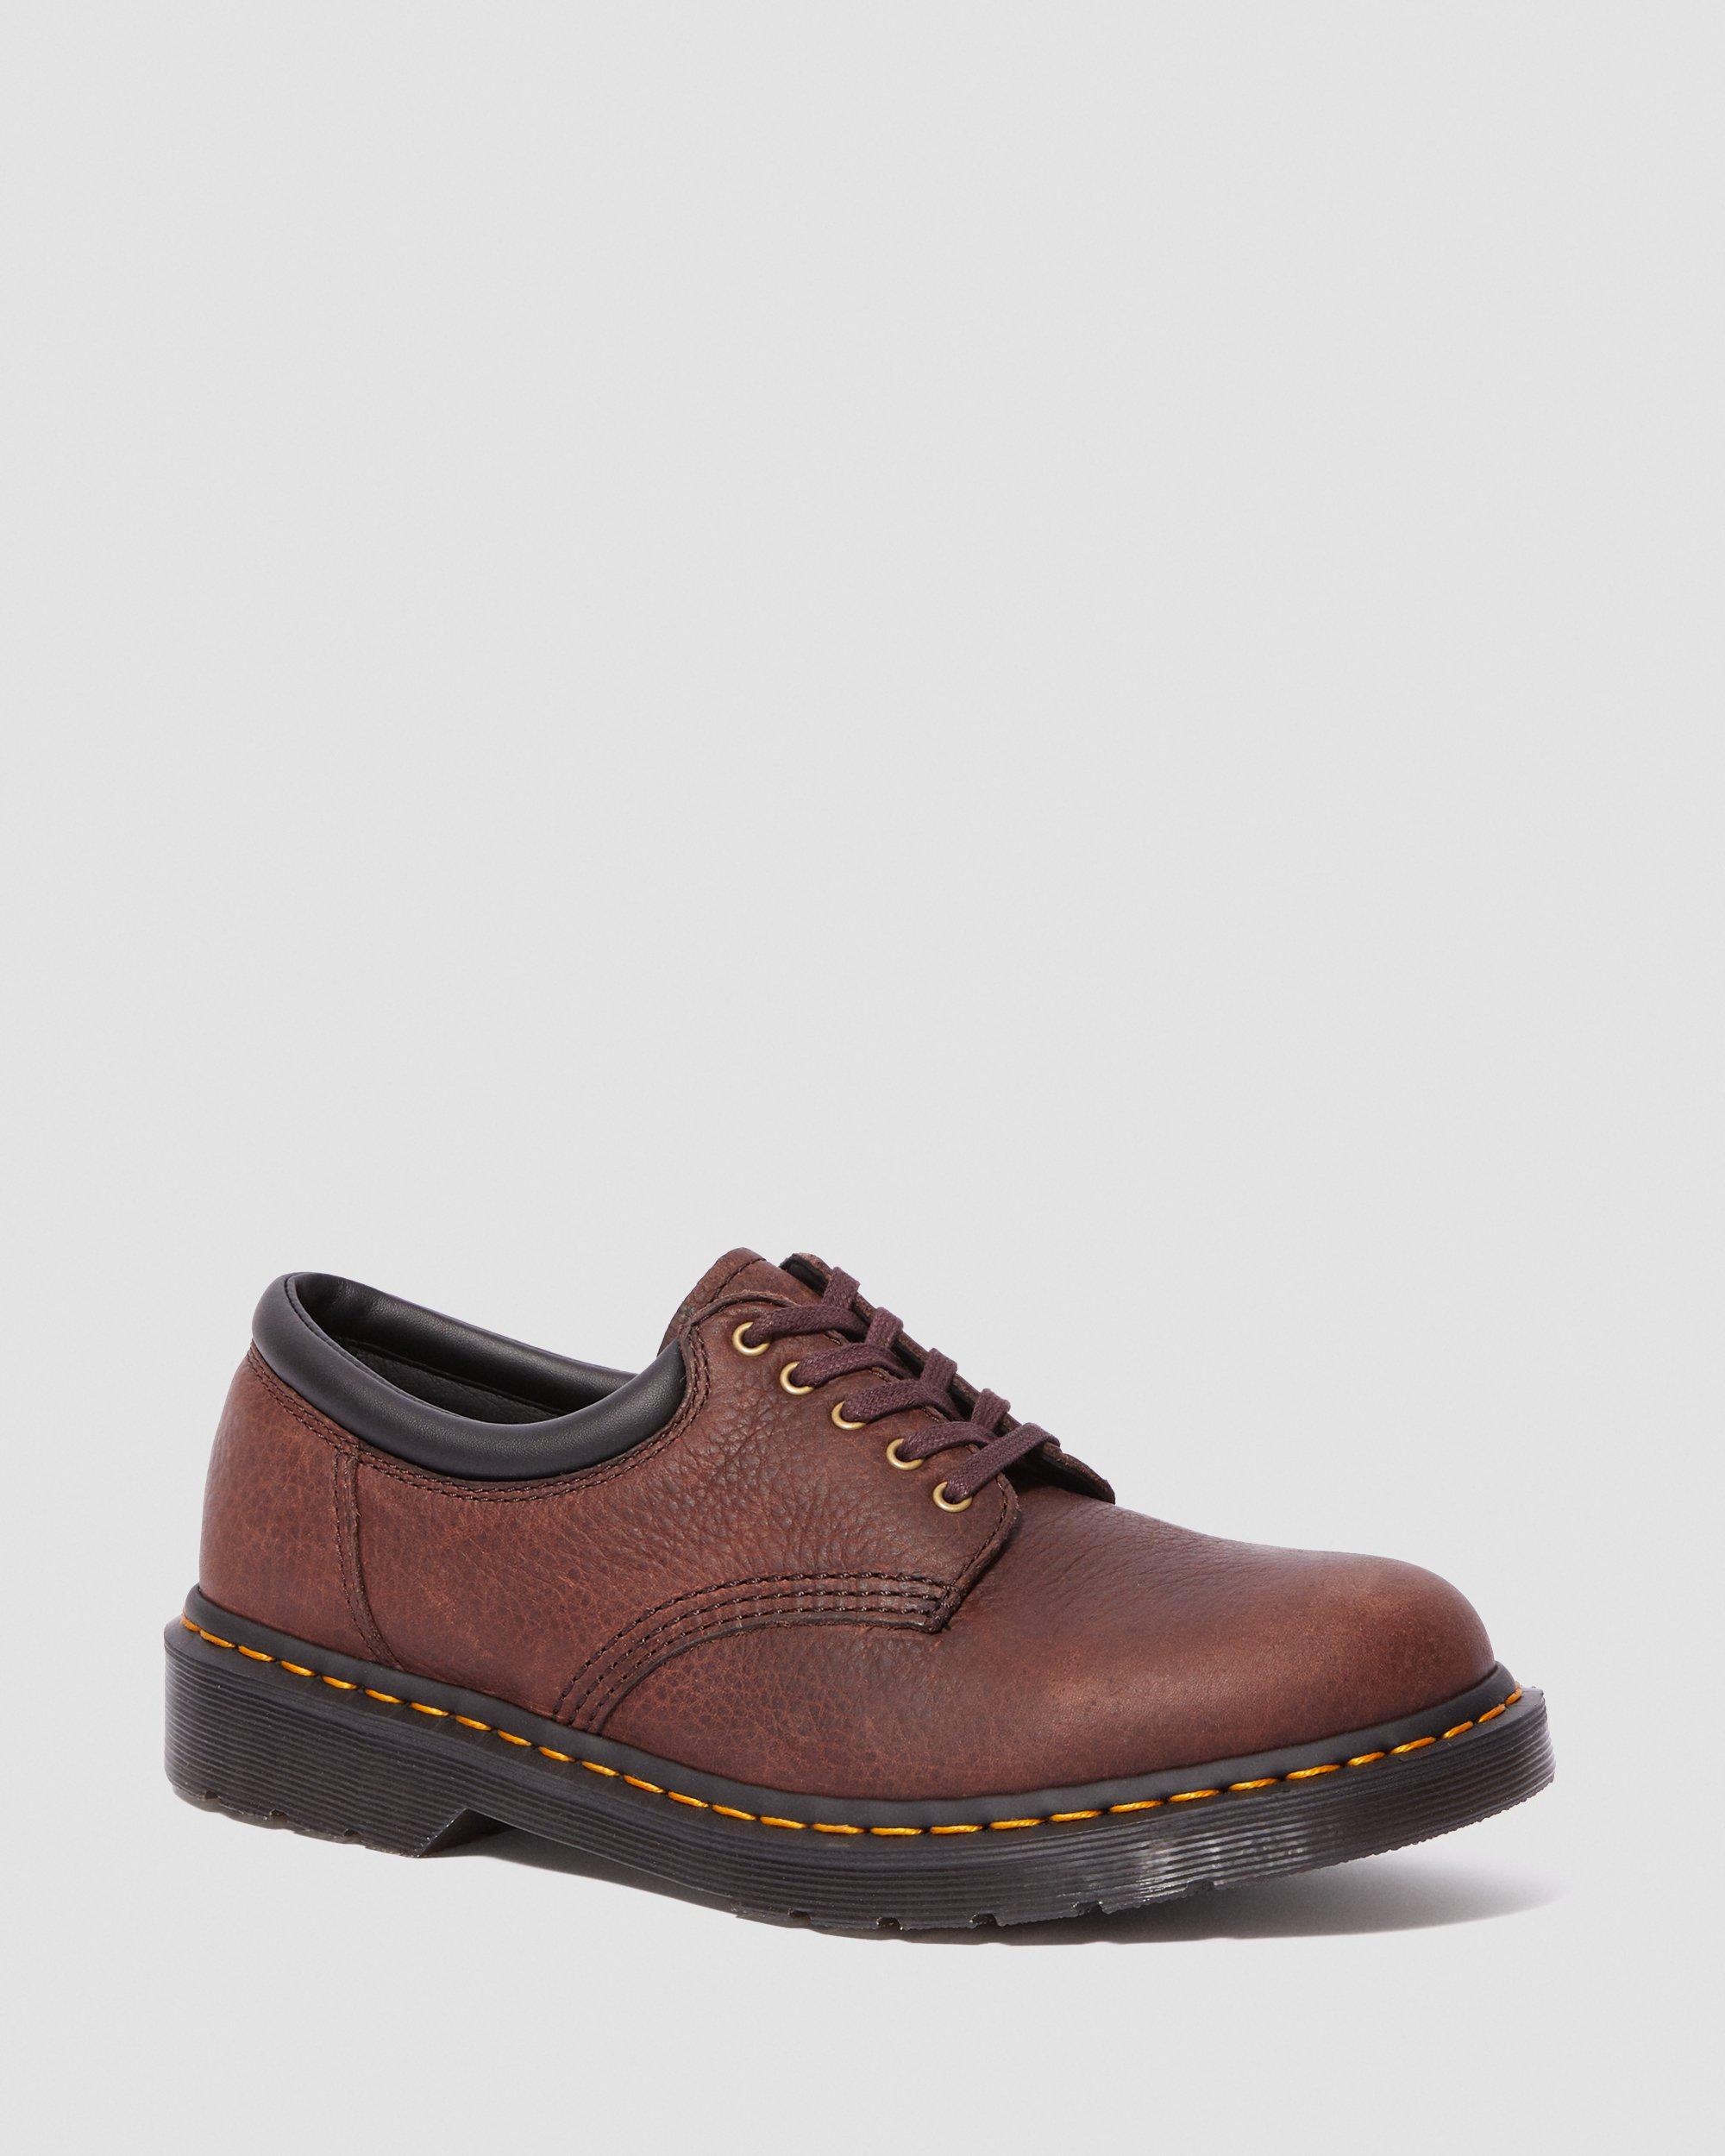 8053 LEATHER PADDED COLLAR SHOES | Dr. Martens